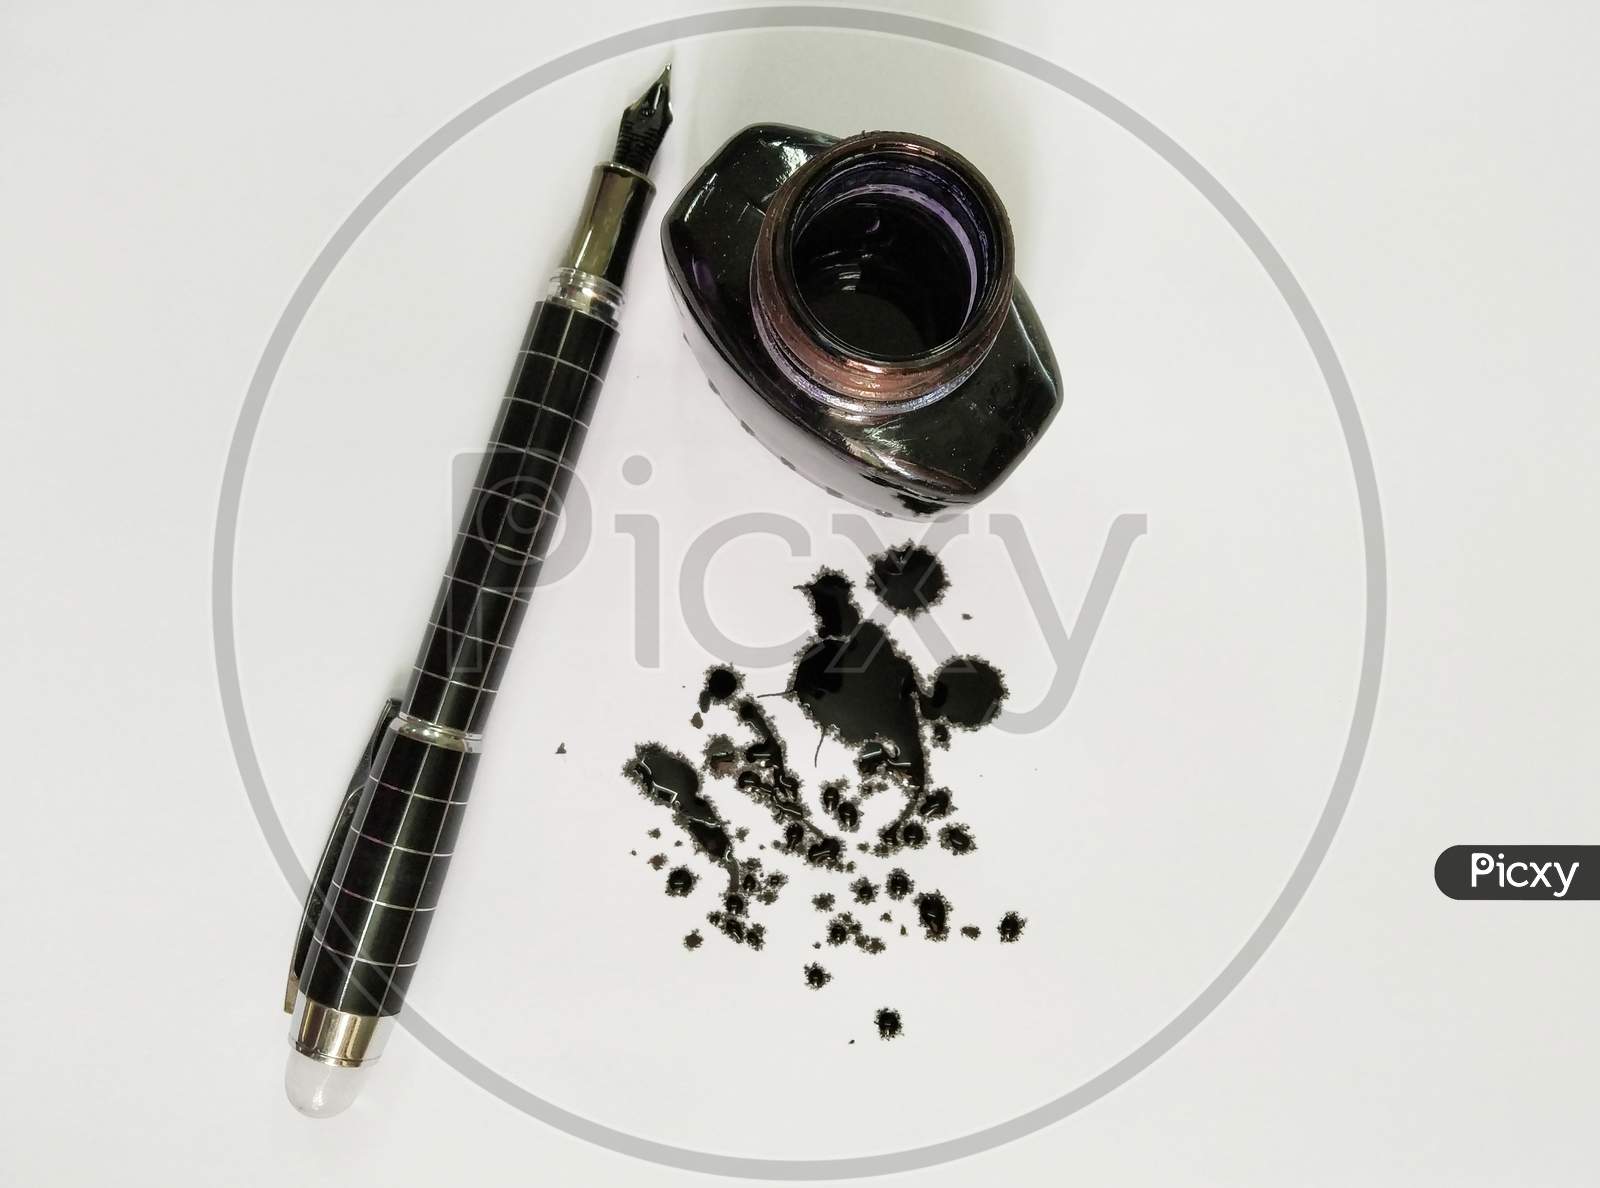 A Ink Pen With Black Ink Scattered On Paper And A Ink Bottle